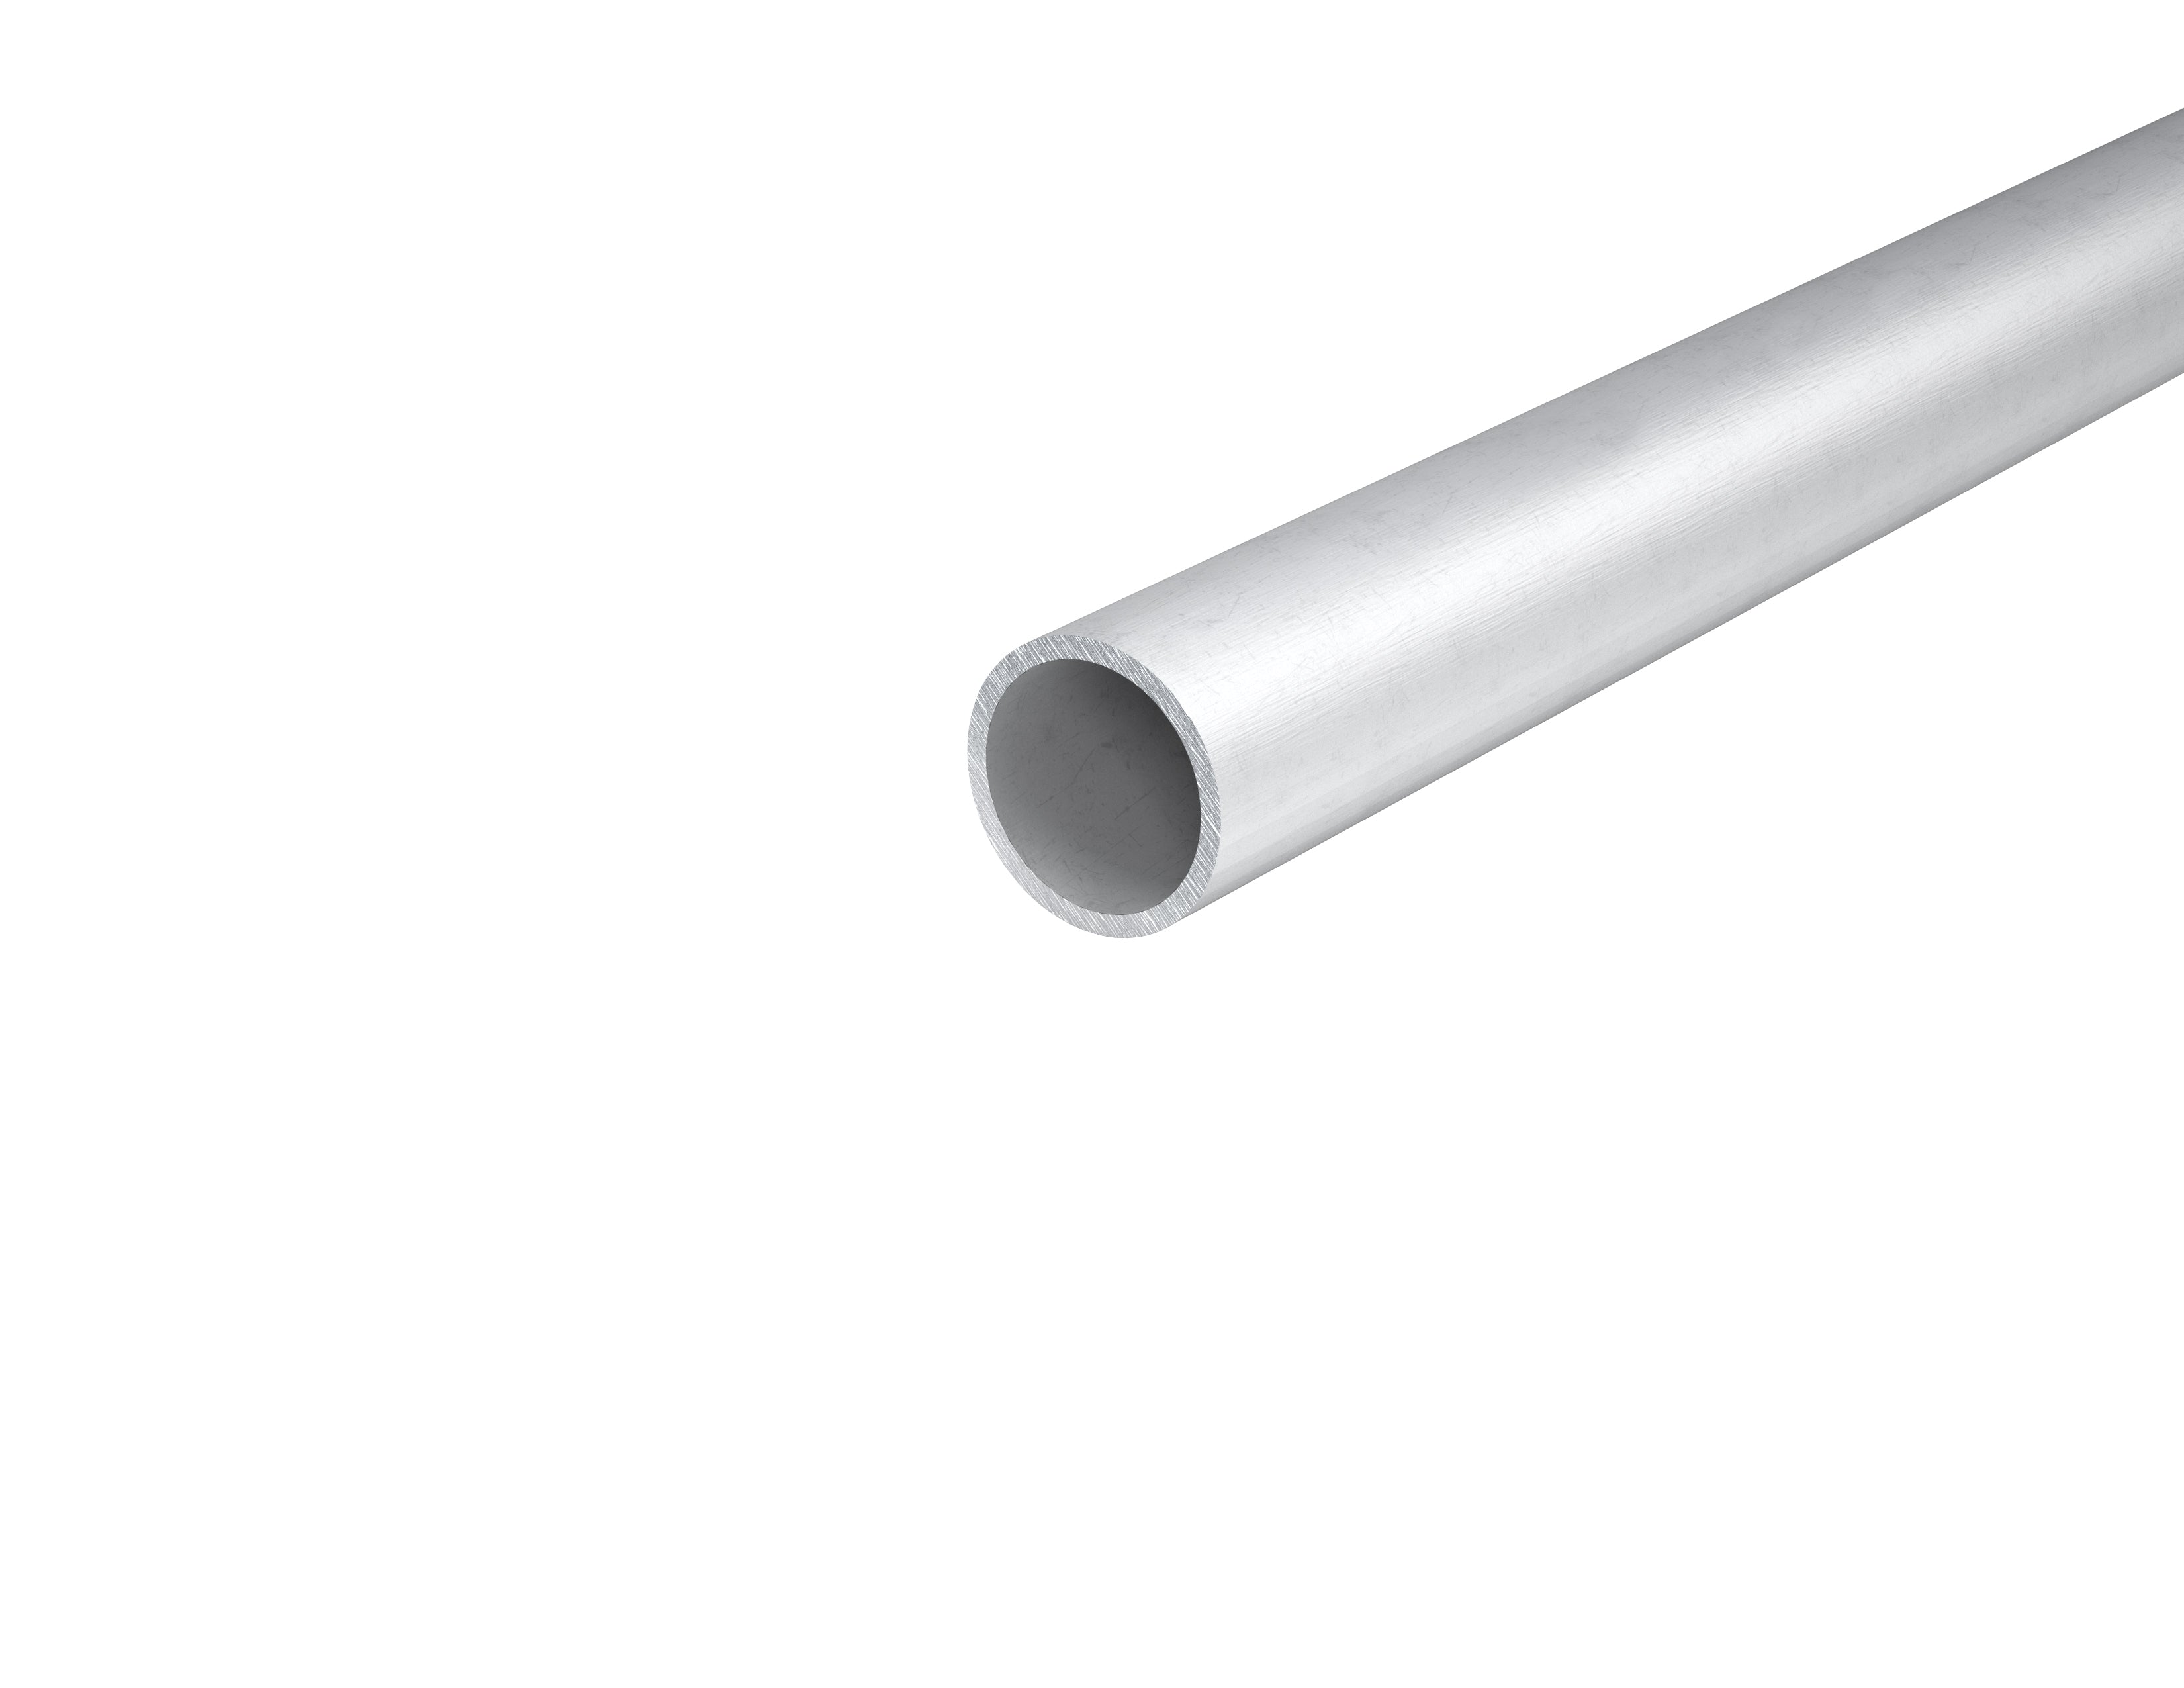 1.625 OD x 0.125 Wall Extruded Round Aluminum Tube 6063-T5